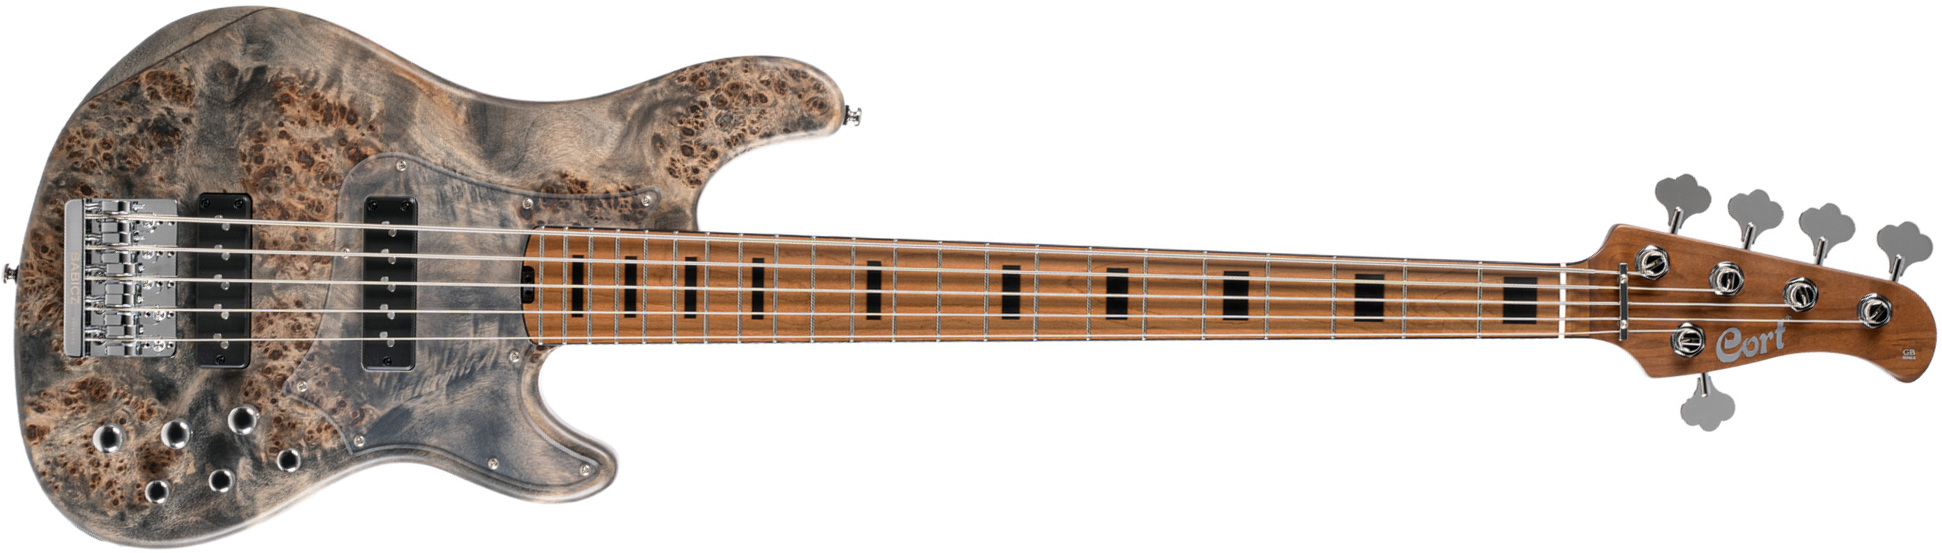 Cort Gb-modern 5c Active Mn - Open Pore Charcoal Gray - Solidbody E-bass - Main picture